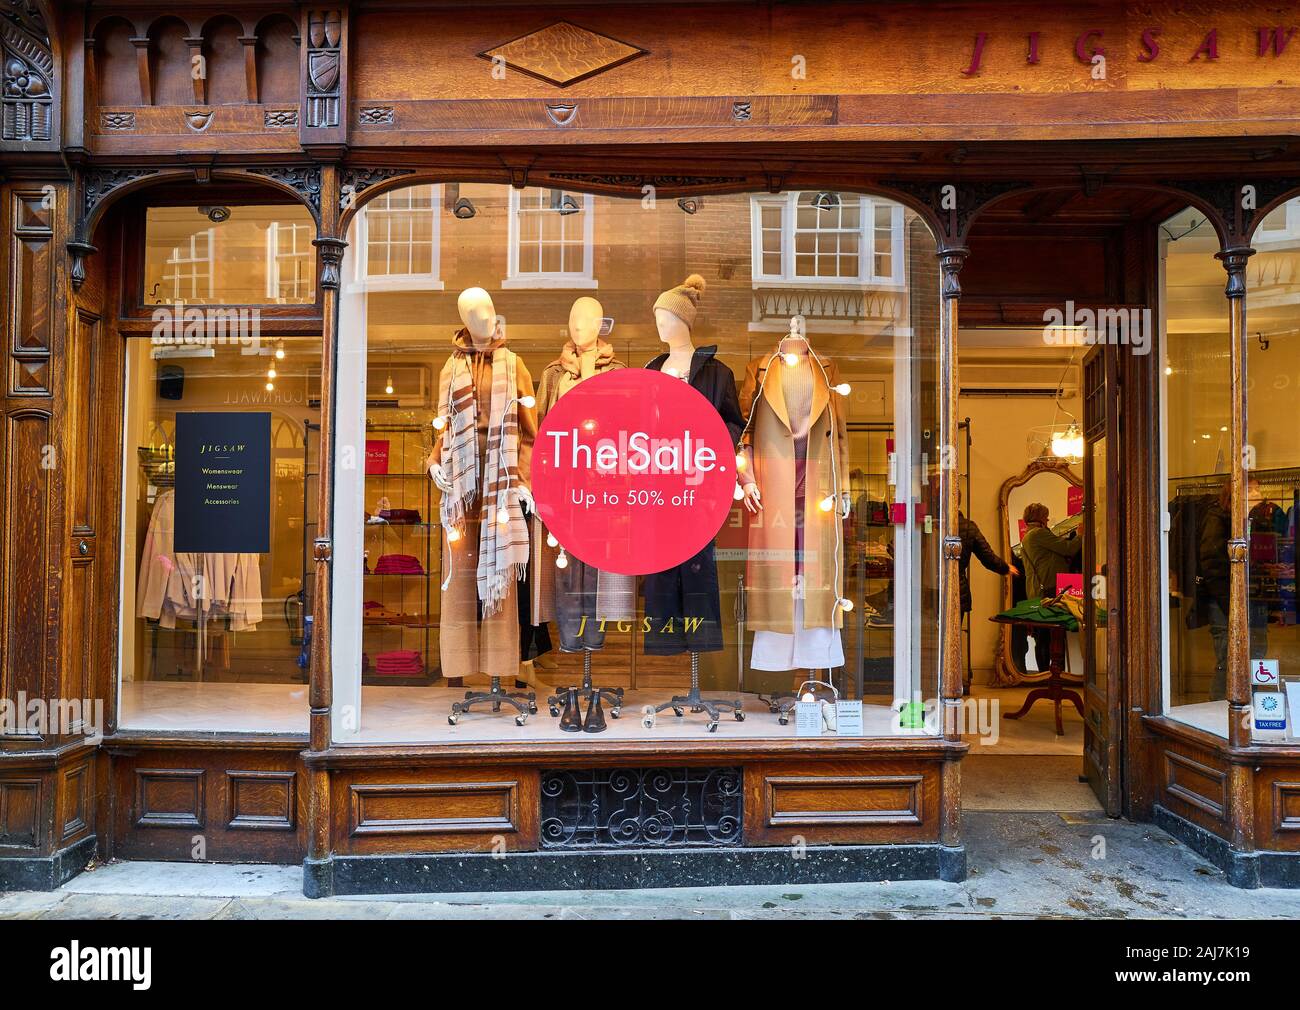 Christmas sale at the Jigsaw clothes shop in Cambridge, England Stock Photo  - Alamy